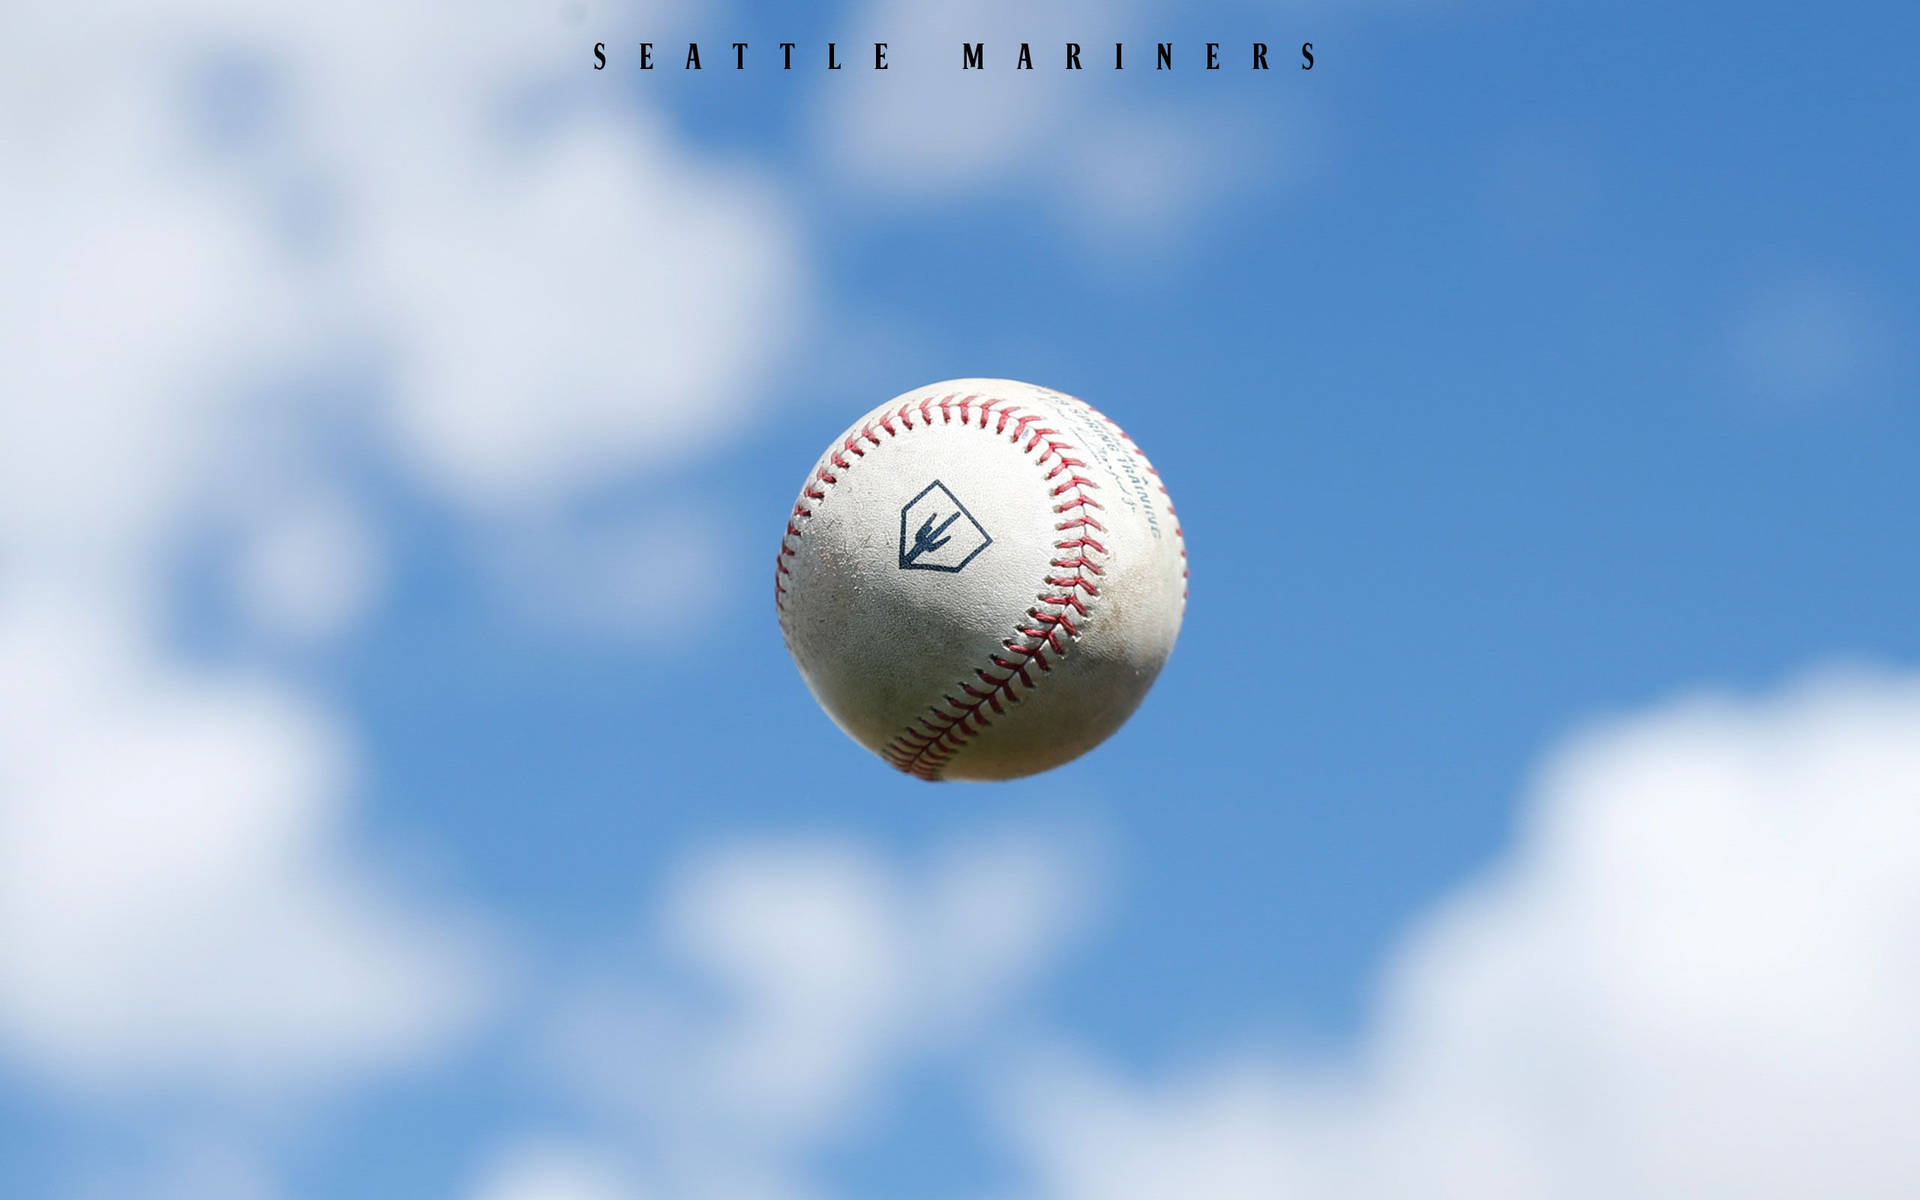 Seattle Mariners Baseball In Air Background